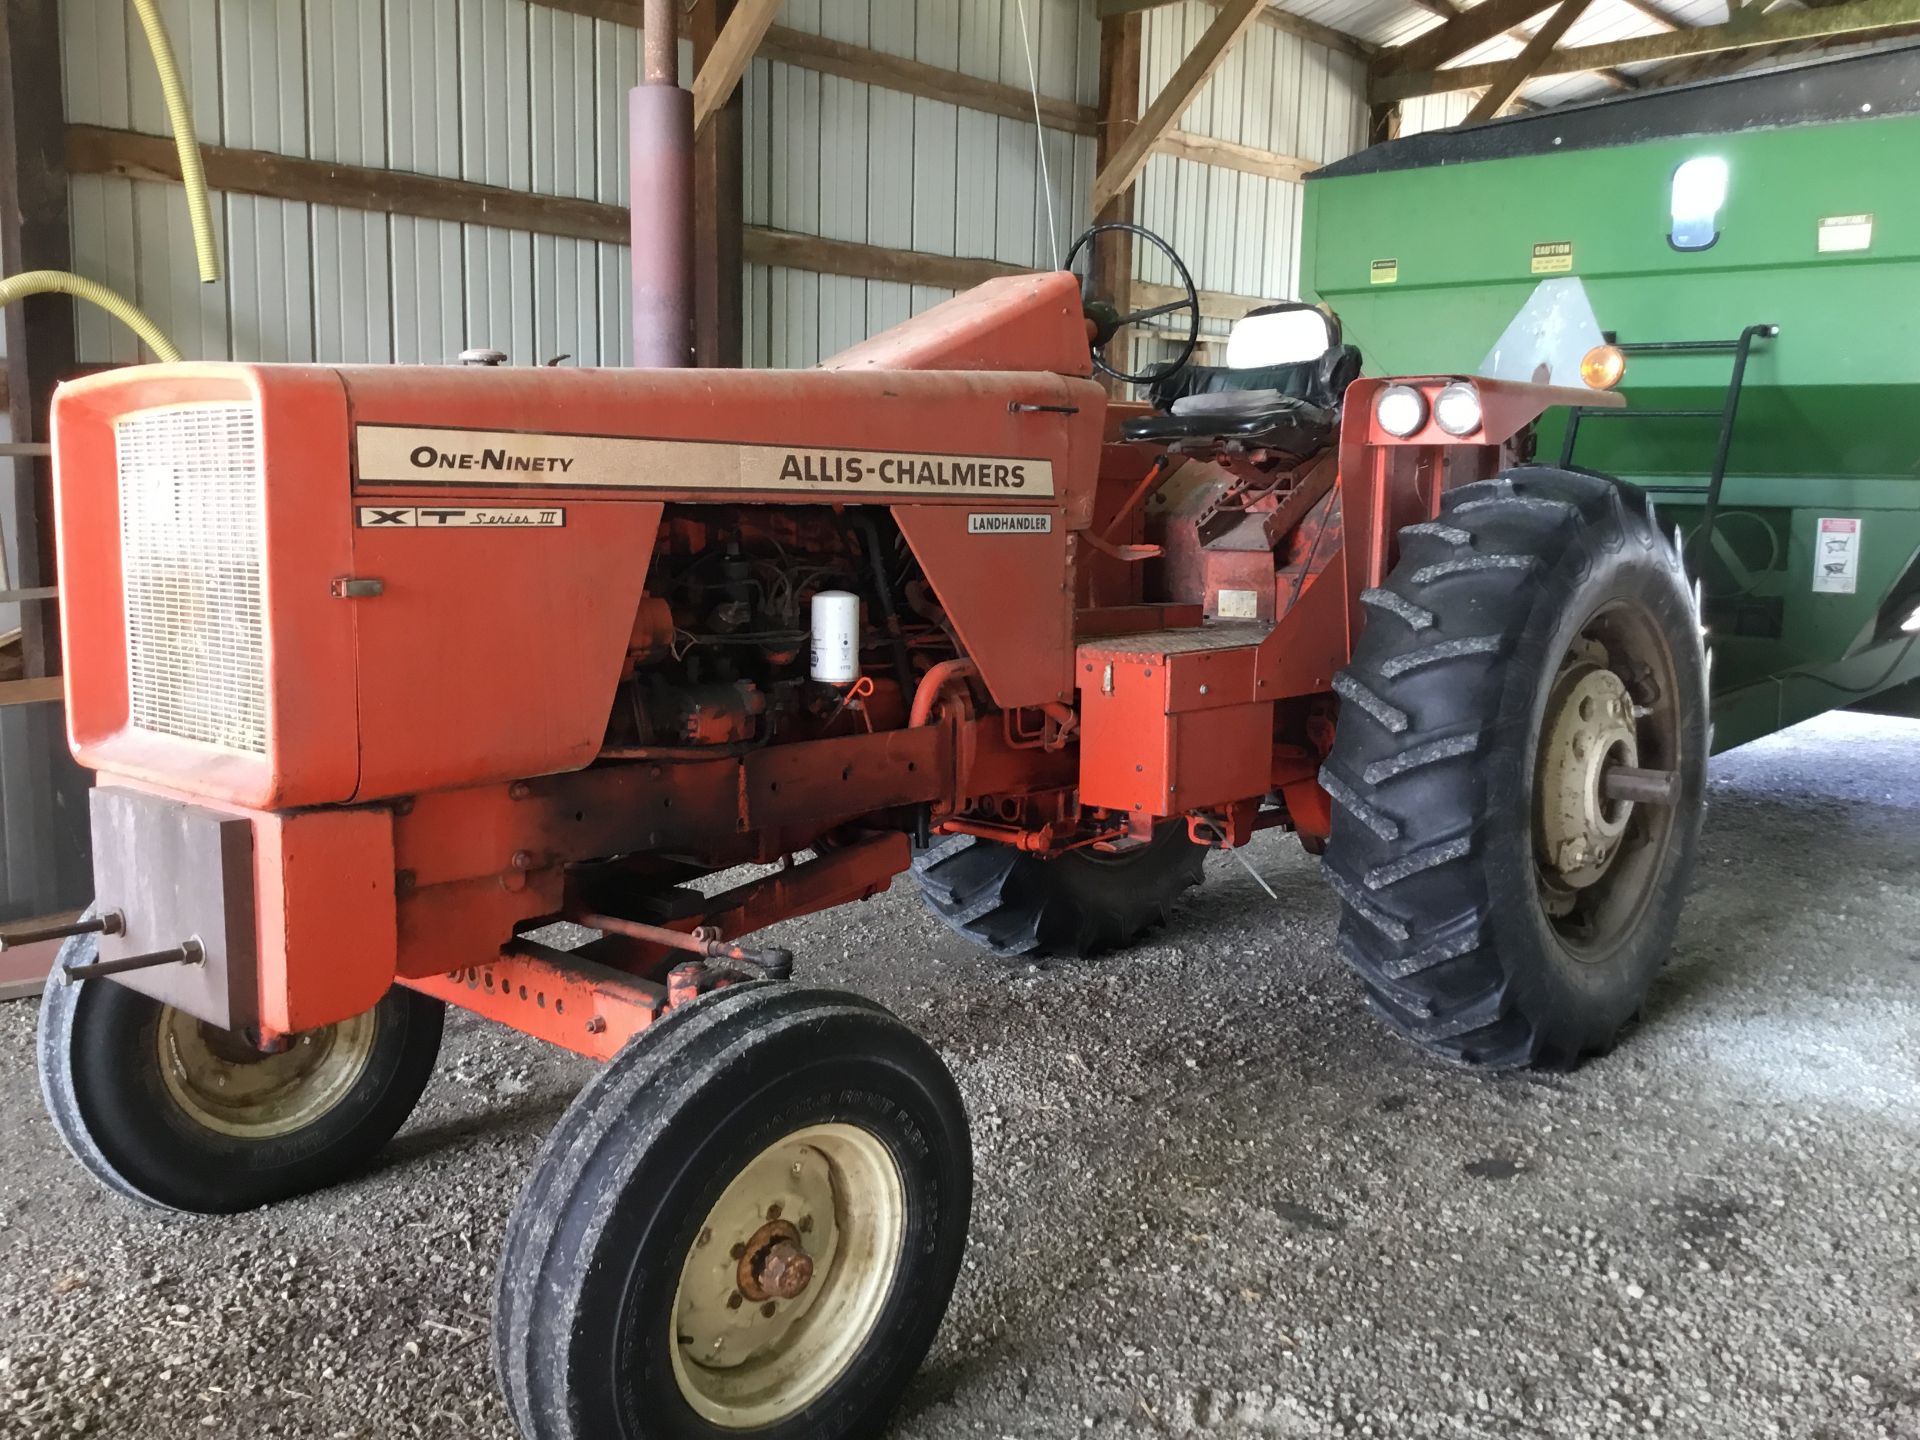 Allis Chalmers 190 XT Series 3, Gas, Wide Front, 3 Pt. Hitch, 16.9-34 Rear Tires, 7:50-16 Front - Image 6 of 9